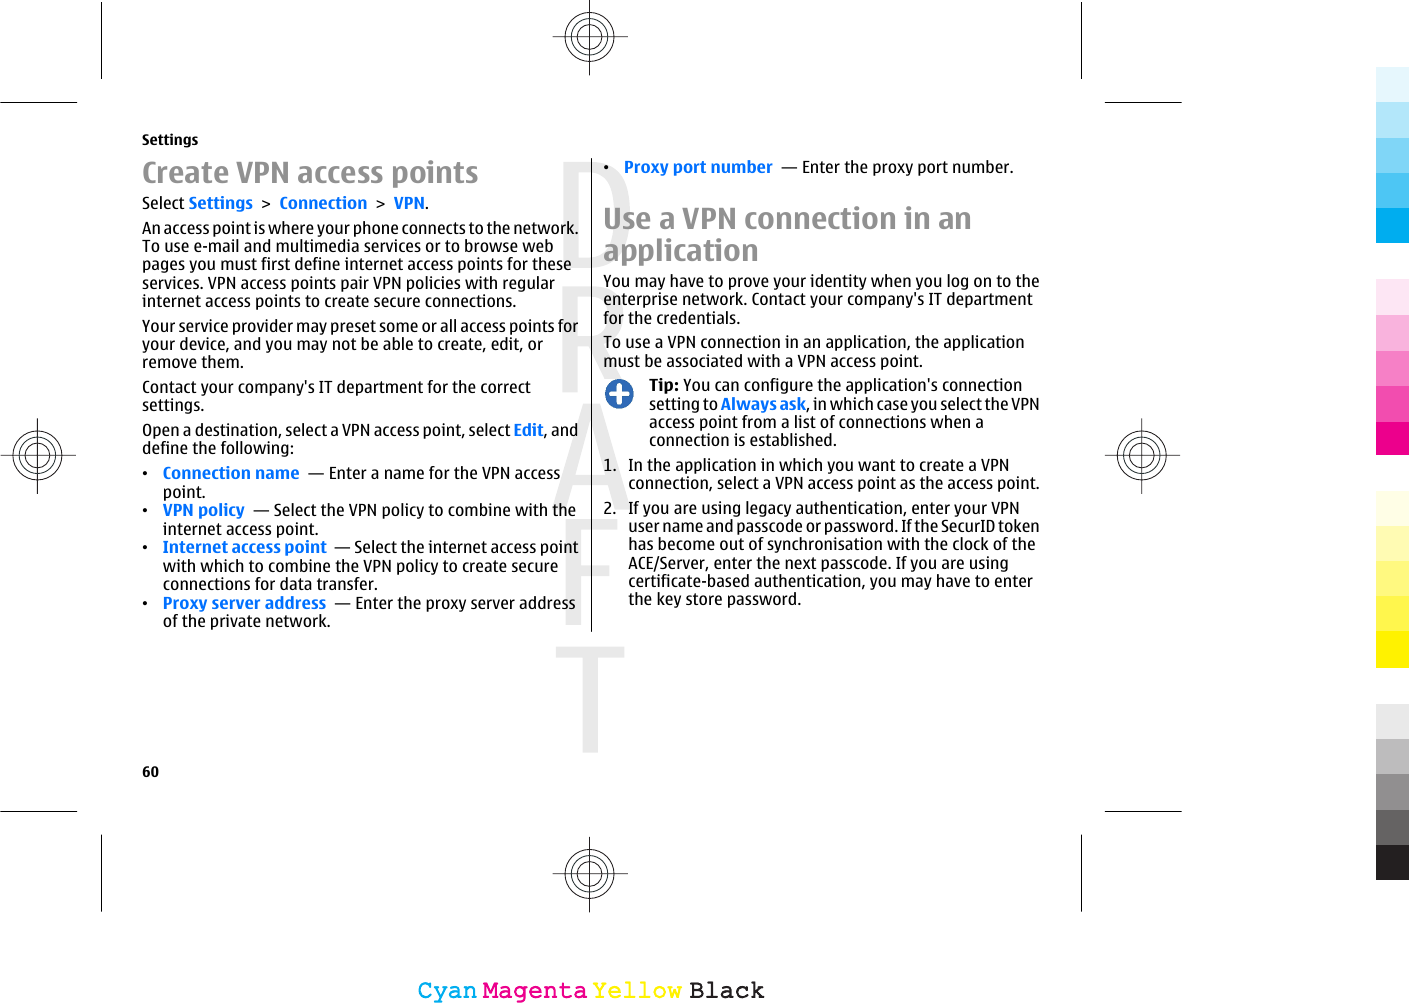 Create VPN access pointsSelect Settings &gt; Connection &gt; VPN.An access point is where your phone connects to the network.To use e-mail and multimedia services or to browse webpages you must first define internet access points for theseservices. VPN access points pair VPN policies with regularinternet access points to create secure connections.Your service provider may preset some or all access points foryour device, and you may not be able to create, edit, orremove them.Contact your company&apos;s IT department for the correctsettings.Open a destination, select a VPN access point, select Edit, anddefine the following:•Connection name  — Enter a name for the VPN accesspoint.•VPN policy  — Select the VPN policy to combine with theinternet access point.•Internet access point  — Select the internet access pointwith which to combine the VPN policy to create secureconnections for data transfer.•Proxy server address  — Enter the proxy server addressof the private network.•Proxy port number  — Enter the proxy port number.Use a VPN connection in anapplicationYou may have to prove your identity when you log on to theenterprise network. Contact your company&apos;s IT departmentfor the credentials.To use a VPN connection in an application, the applicationmust be associated with a VPN access point.Tip: You can configure the application&apos;s connectionsetting to Always ask, in which case you select the VPNaccess point from a list of connections when aconnection is established.1. In the application in which you want to create a VPNconnection, select a VPN access point as the access point.2. If you are using legacy authentication, enter your VPNuser name and passcode or password. If the SecurID tokenhas become out of synchronisation with the clock of theACE/Server, enter the next passcode. If you are usingcertificate-based authentication, you may have to enterthe key store password.Settings60CyanCyanMagentaMagentaYellowYellowBlackBlack